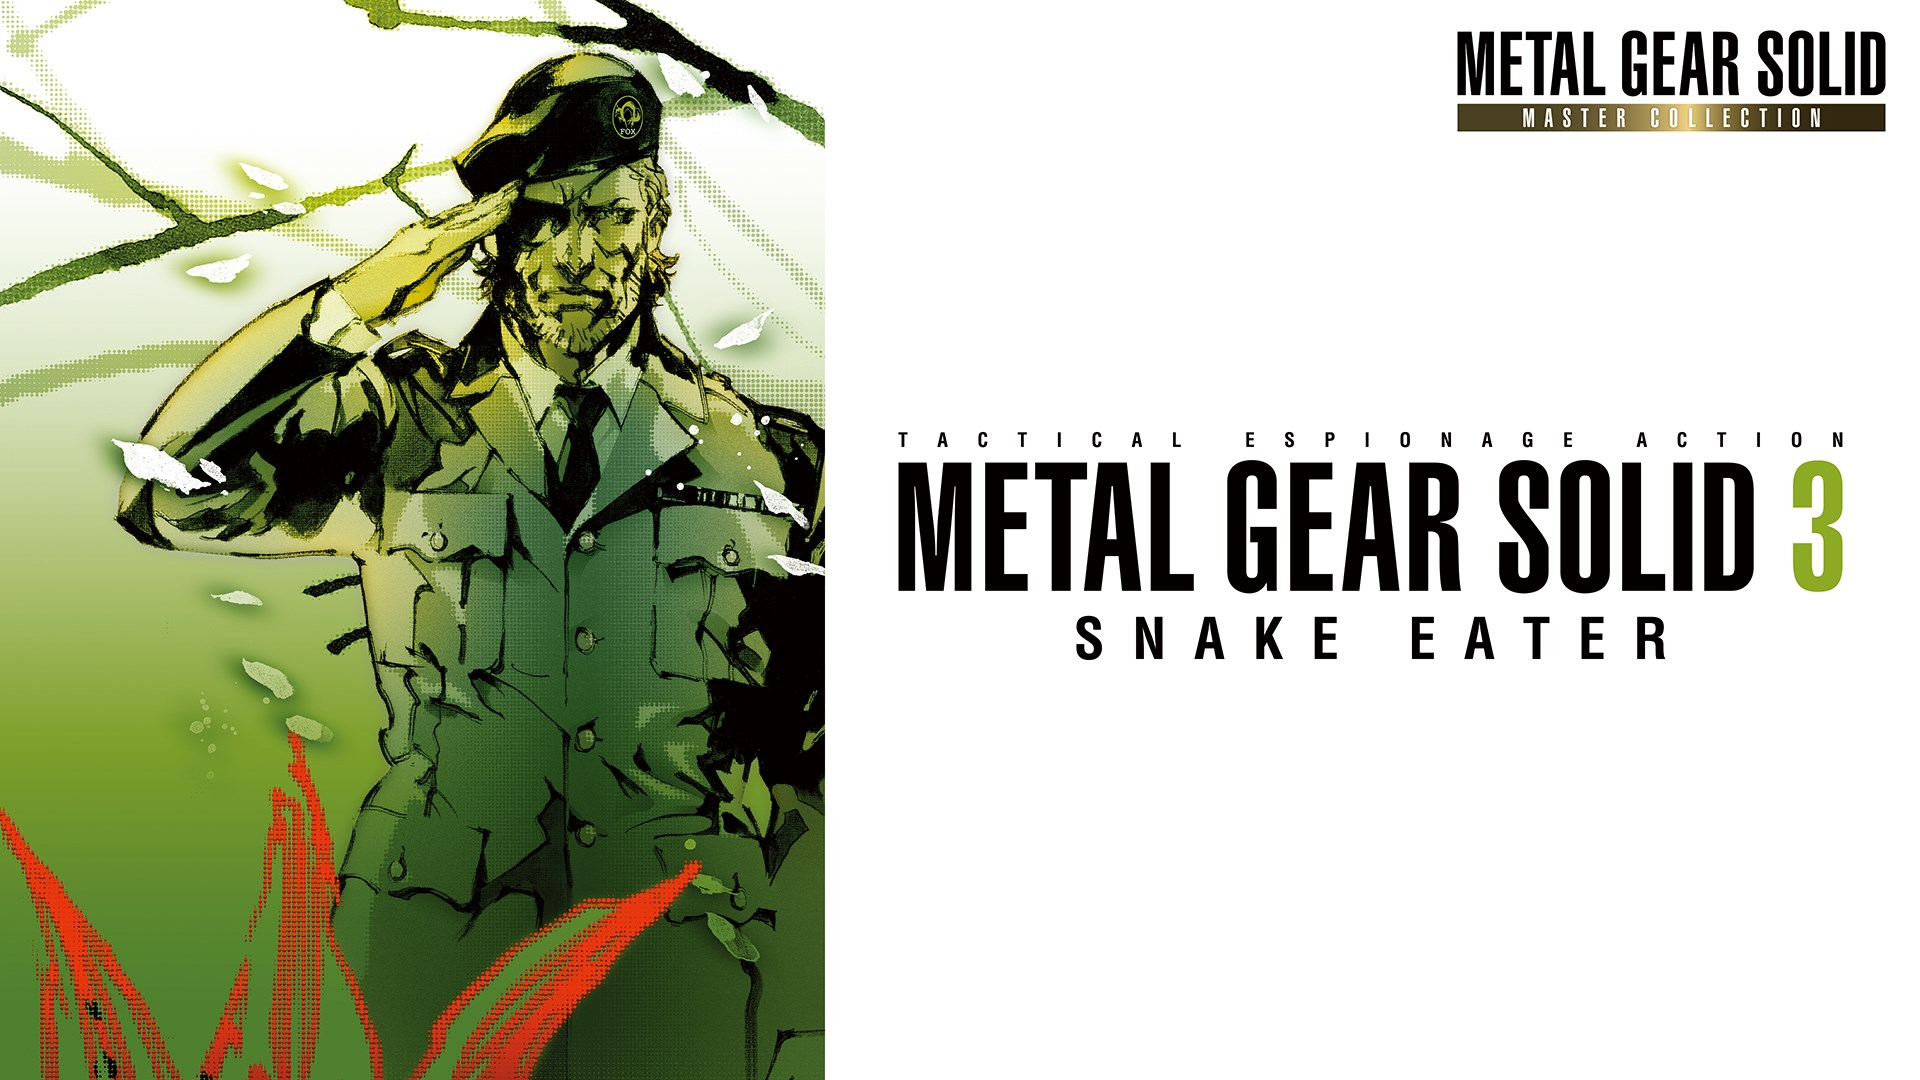 How to get 100% Camouflage? - Metal Gear Solid Master Collection